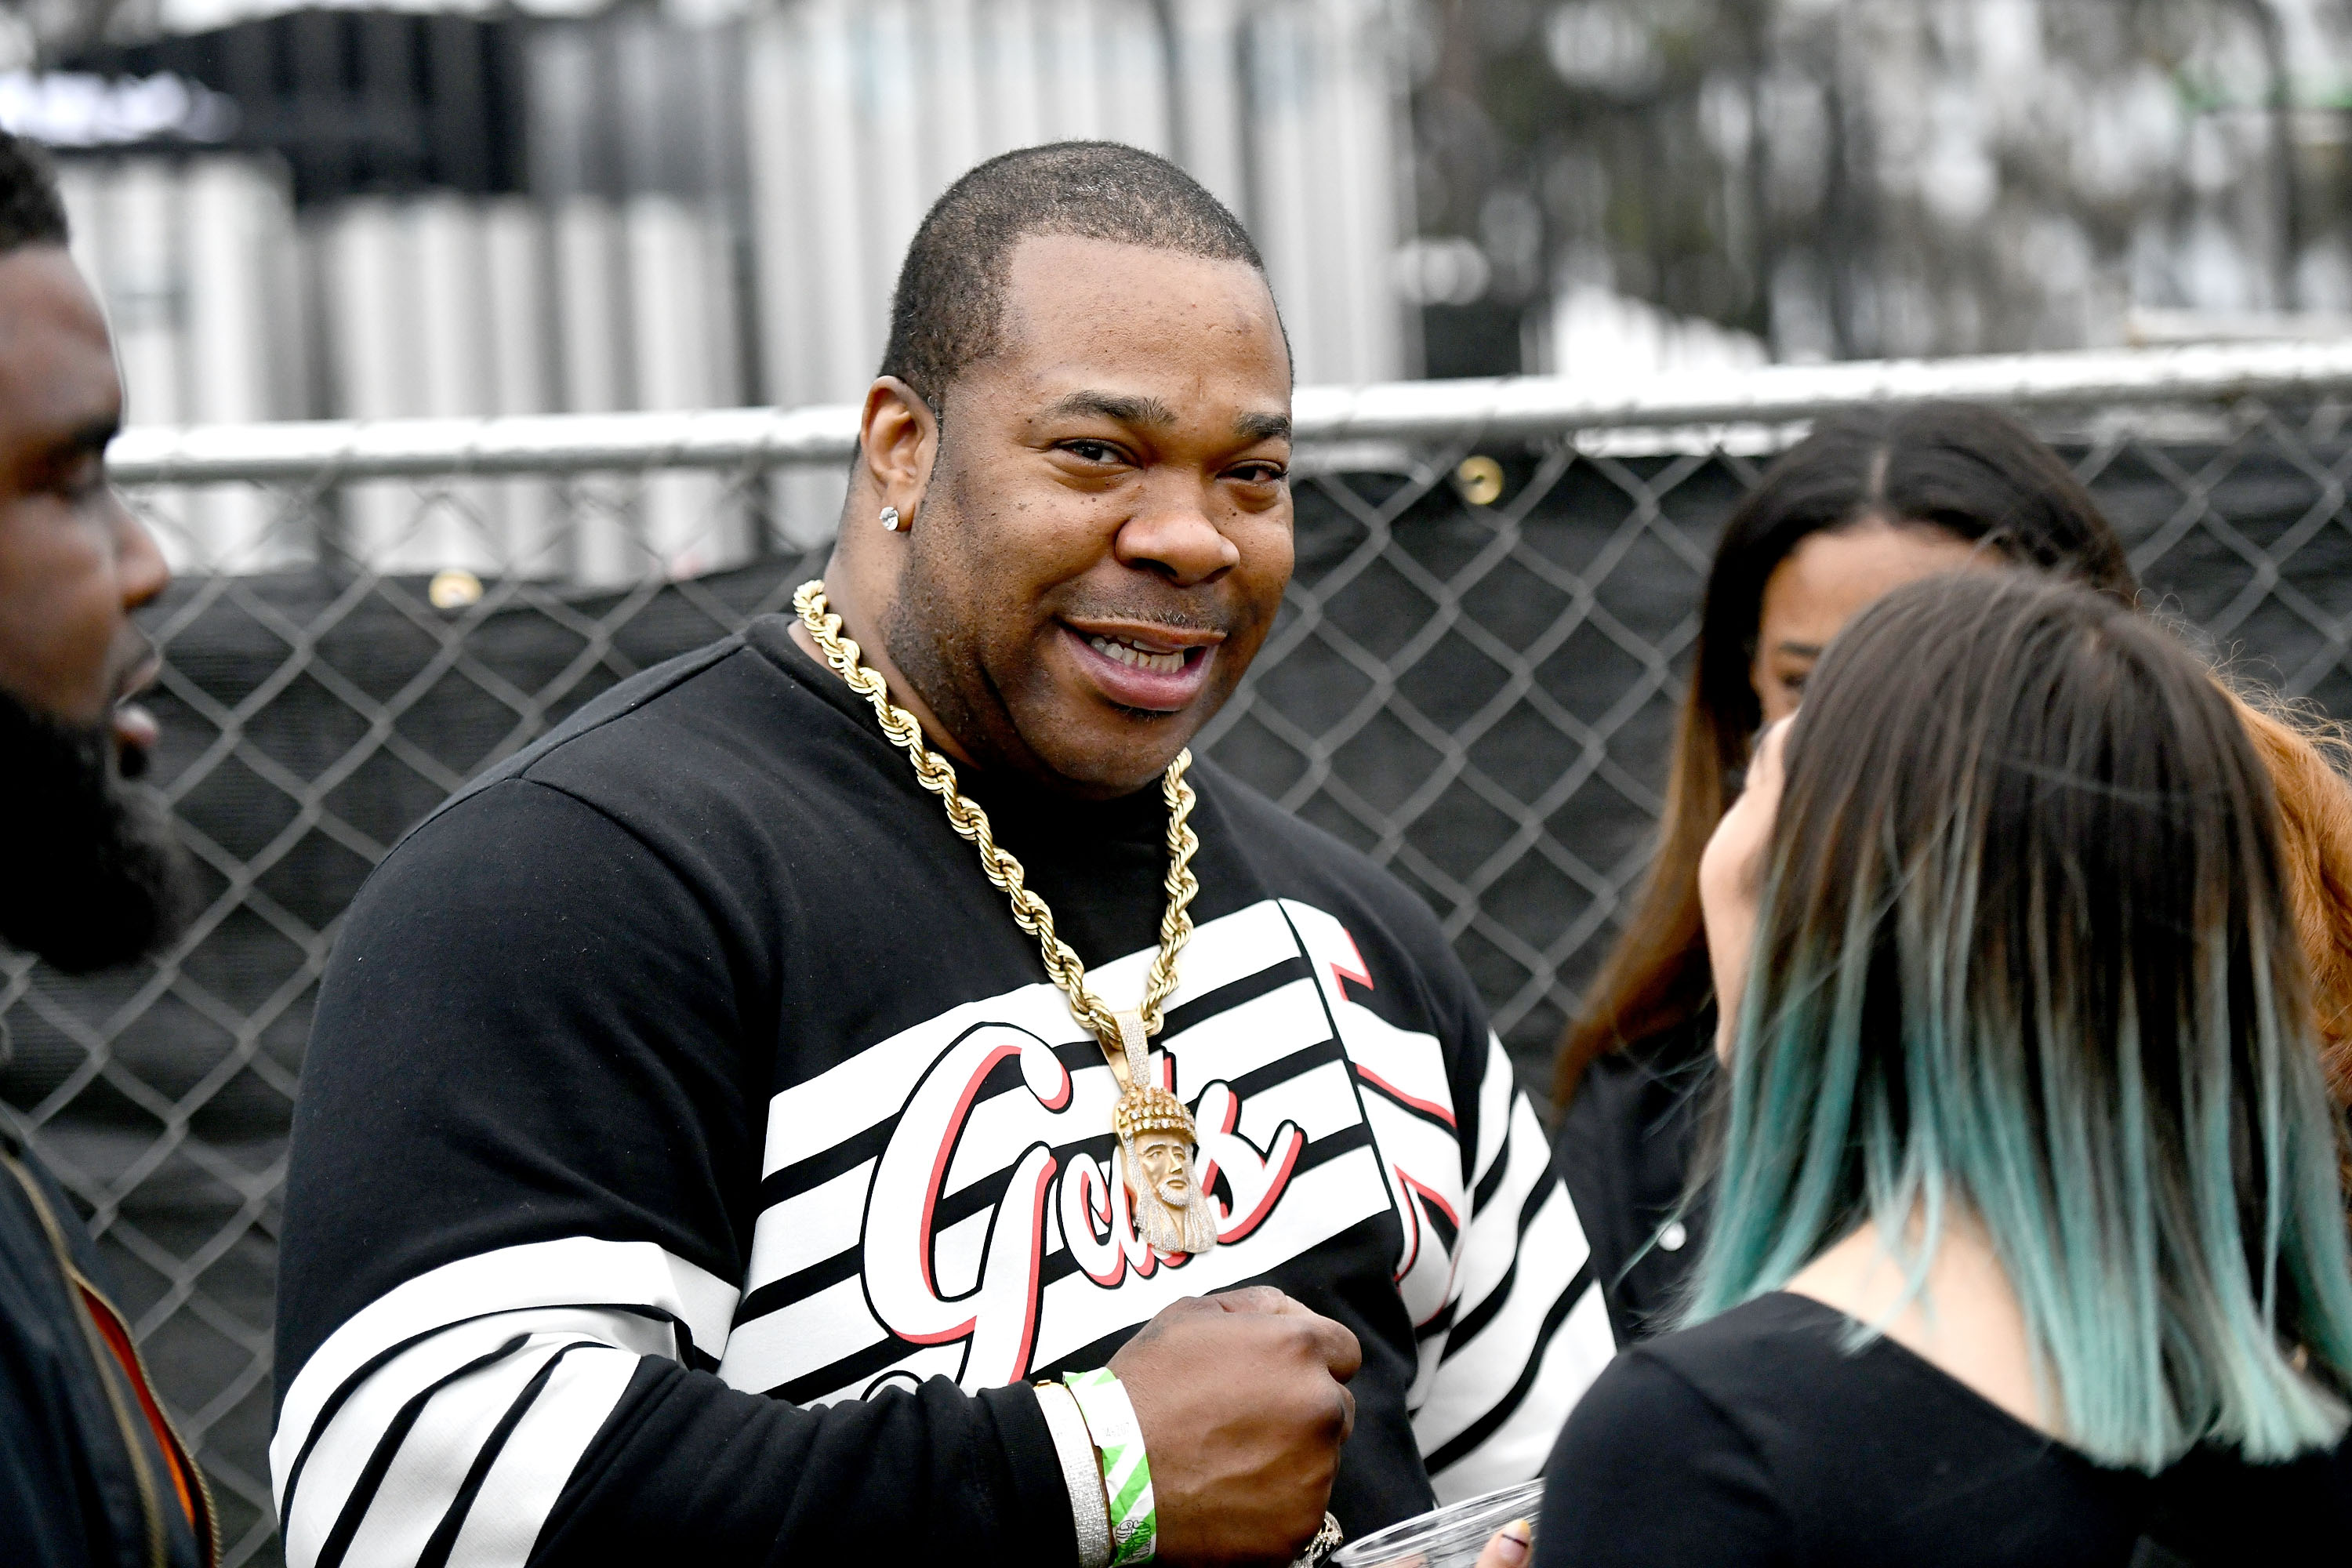 Busta Rhymes attends the Smokin' Grooves Festival at The Queen Mary on June 16, 2018, in Long Beach, California. | Source: Getty Images